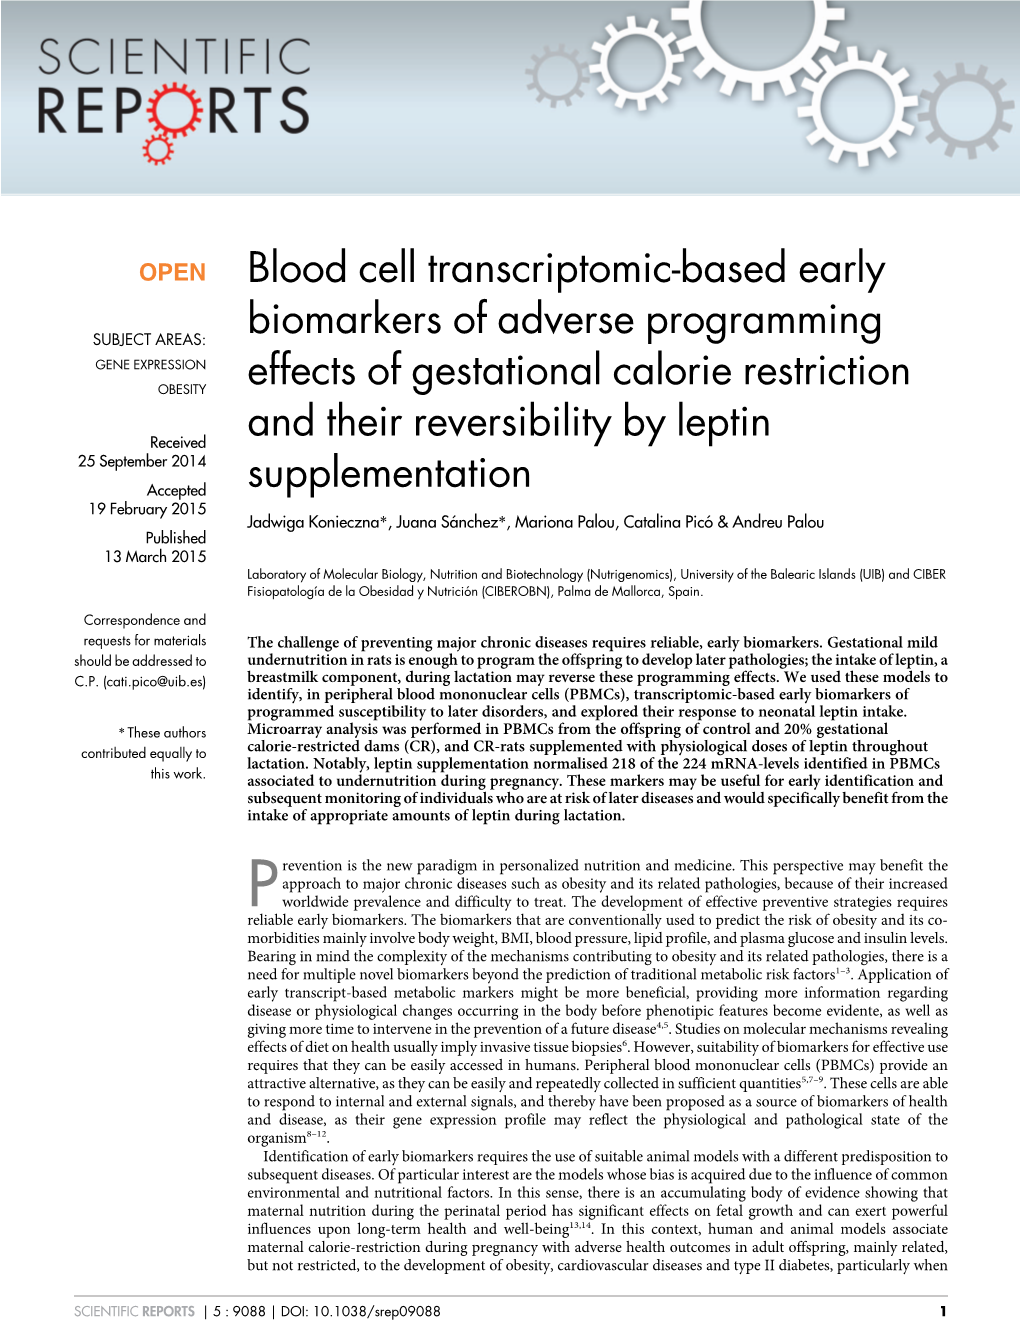 Blood Cell Transcriptomic-Based Early Biomarkers of Adverse